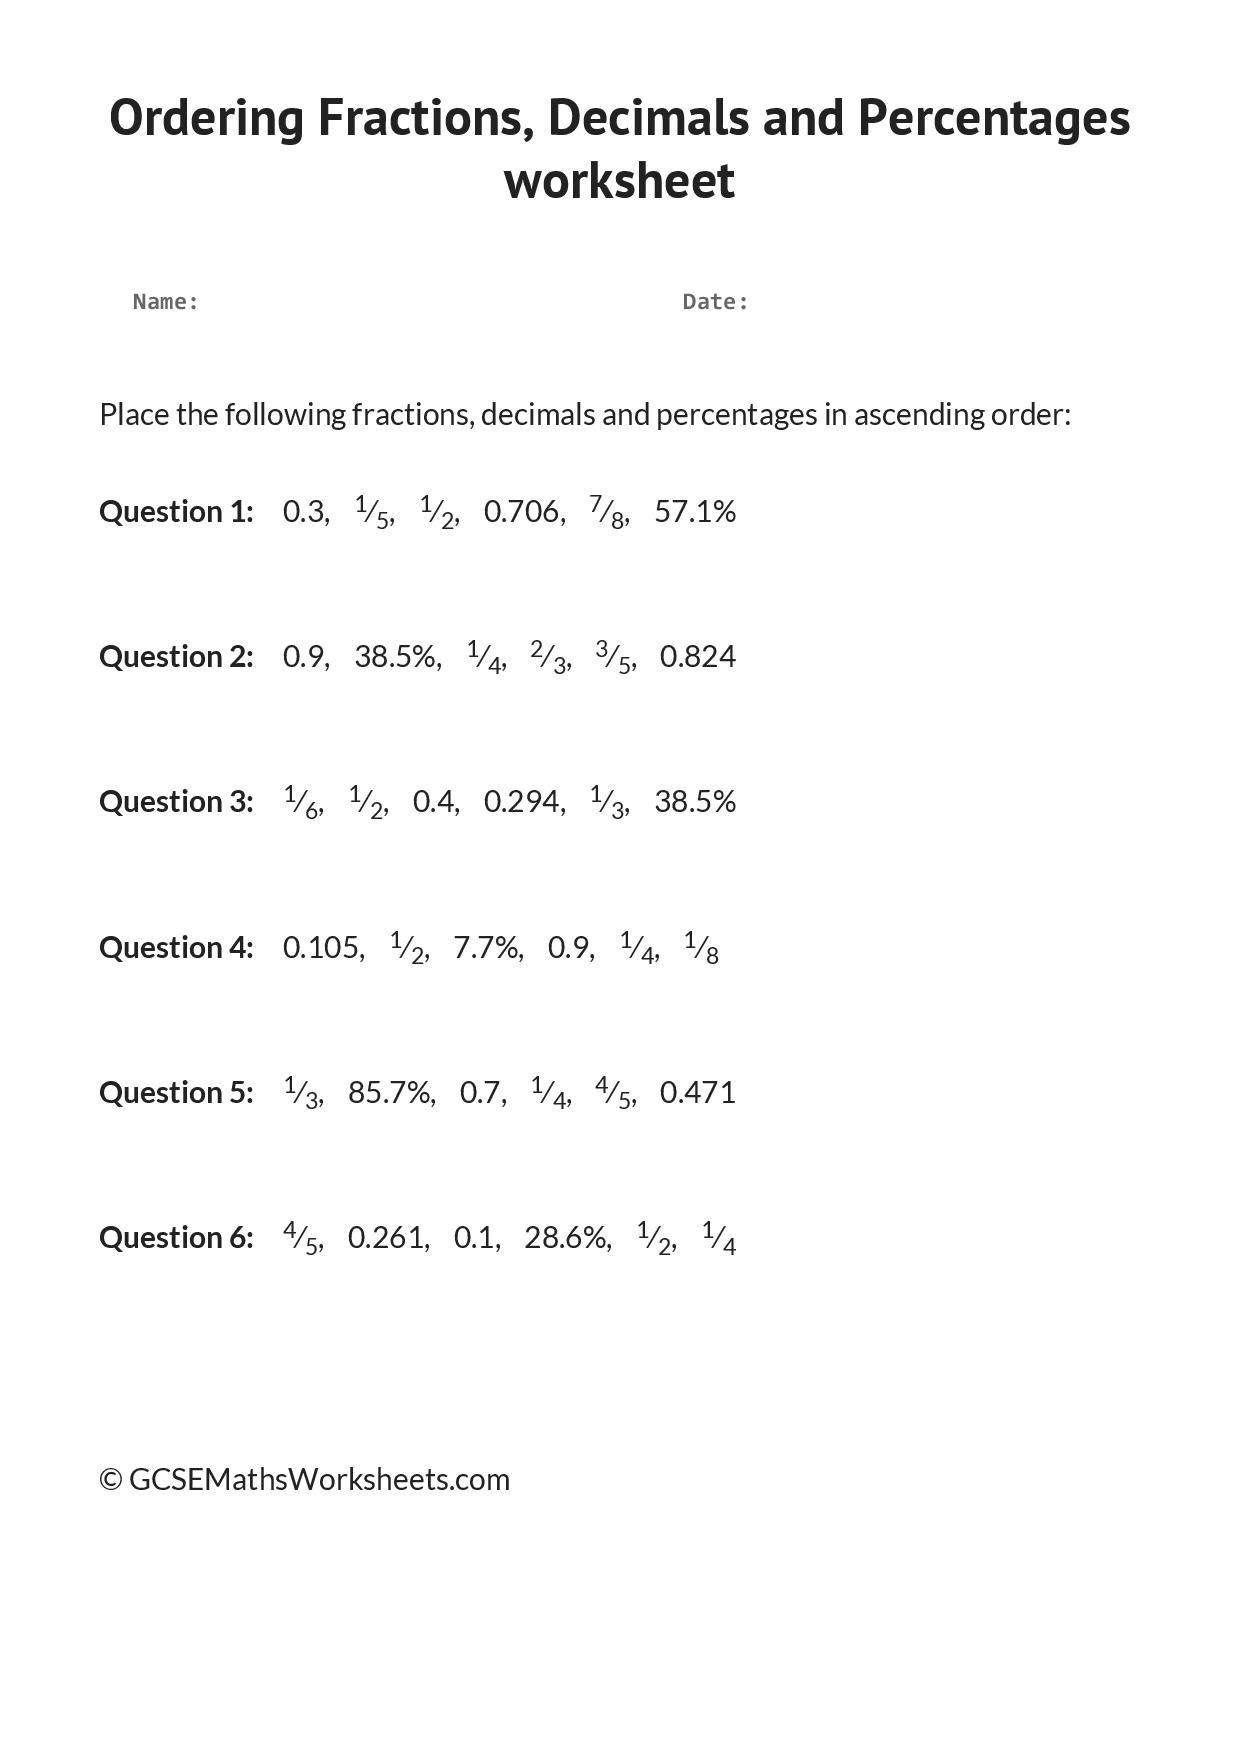 Ordering Fractions and Decimals Worksheet ordering Fractions Decimals and Percentages Worksheet